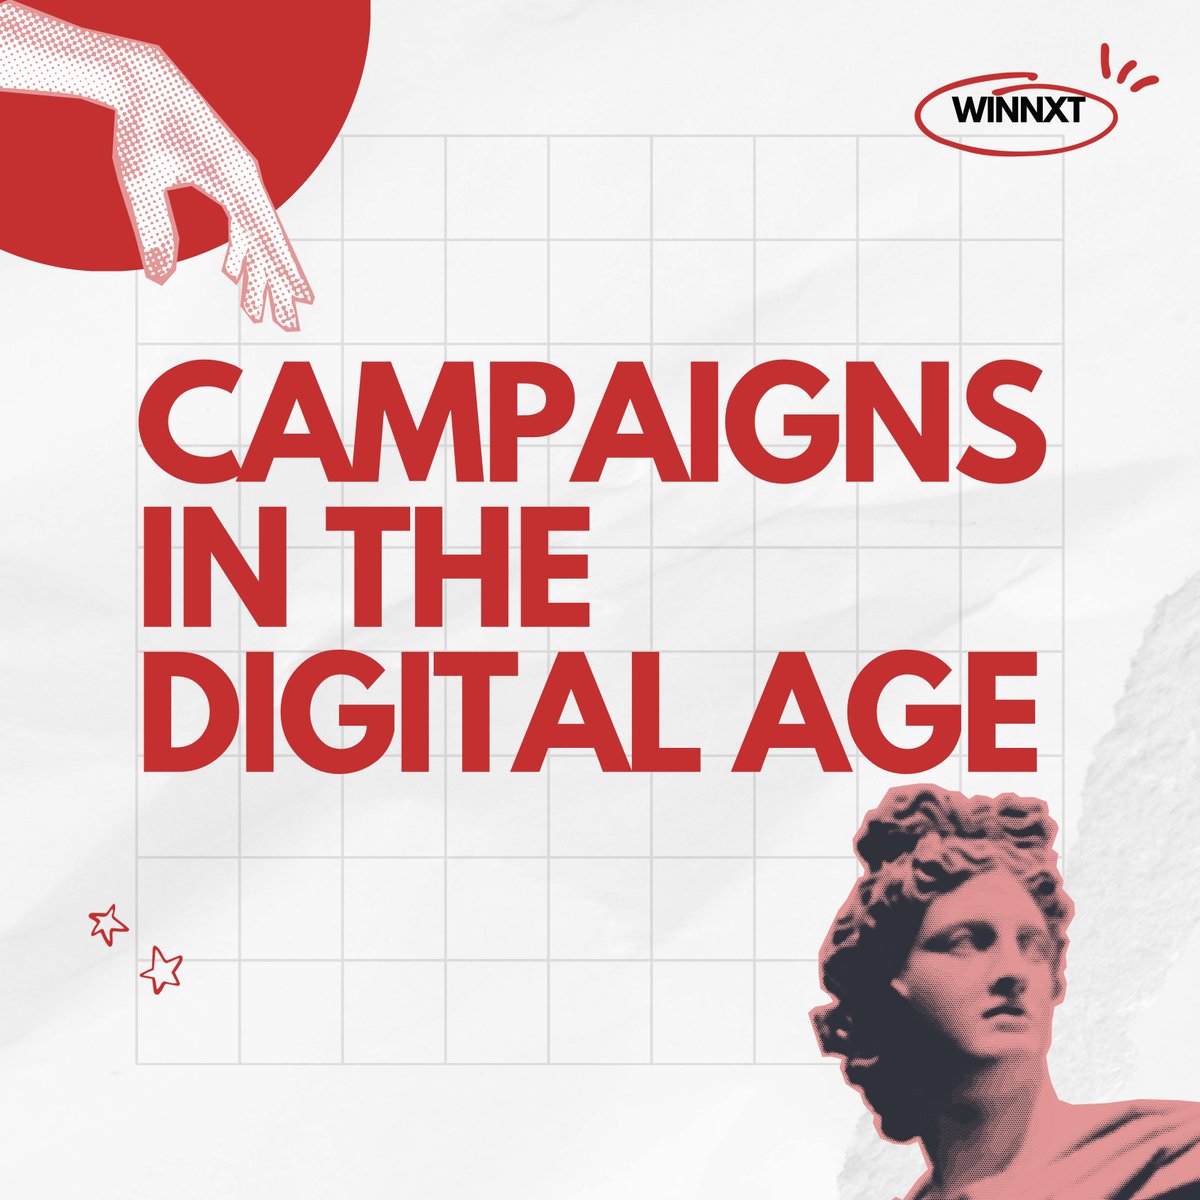 Your same old campaign strategies will not work in 2024. New age campaigns are ever-changing; with WINNXT, you'll have an expert campaigning in the digital age.